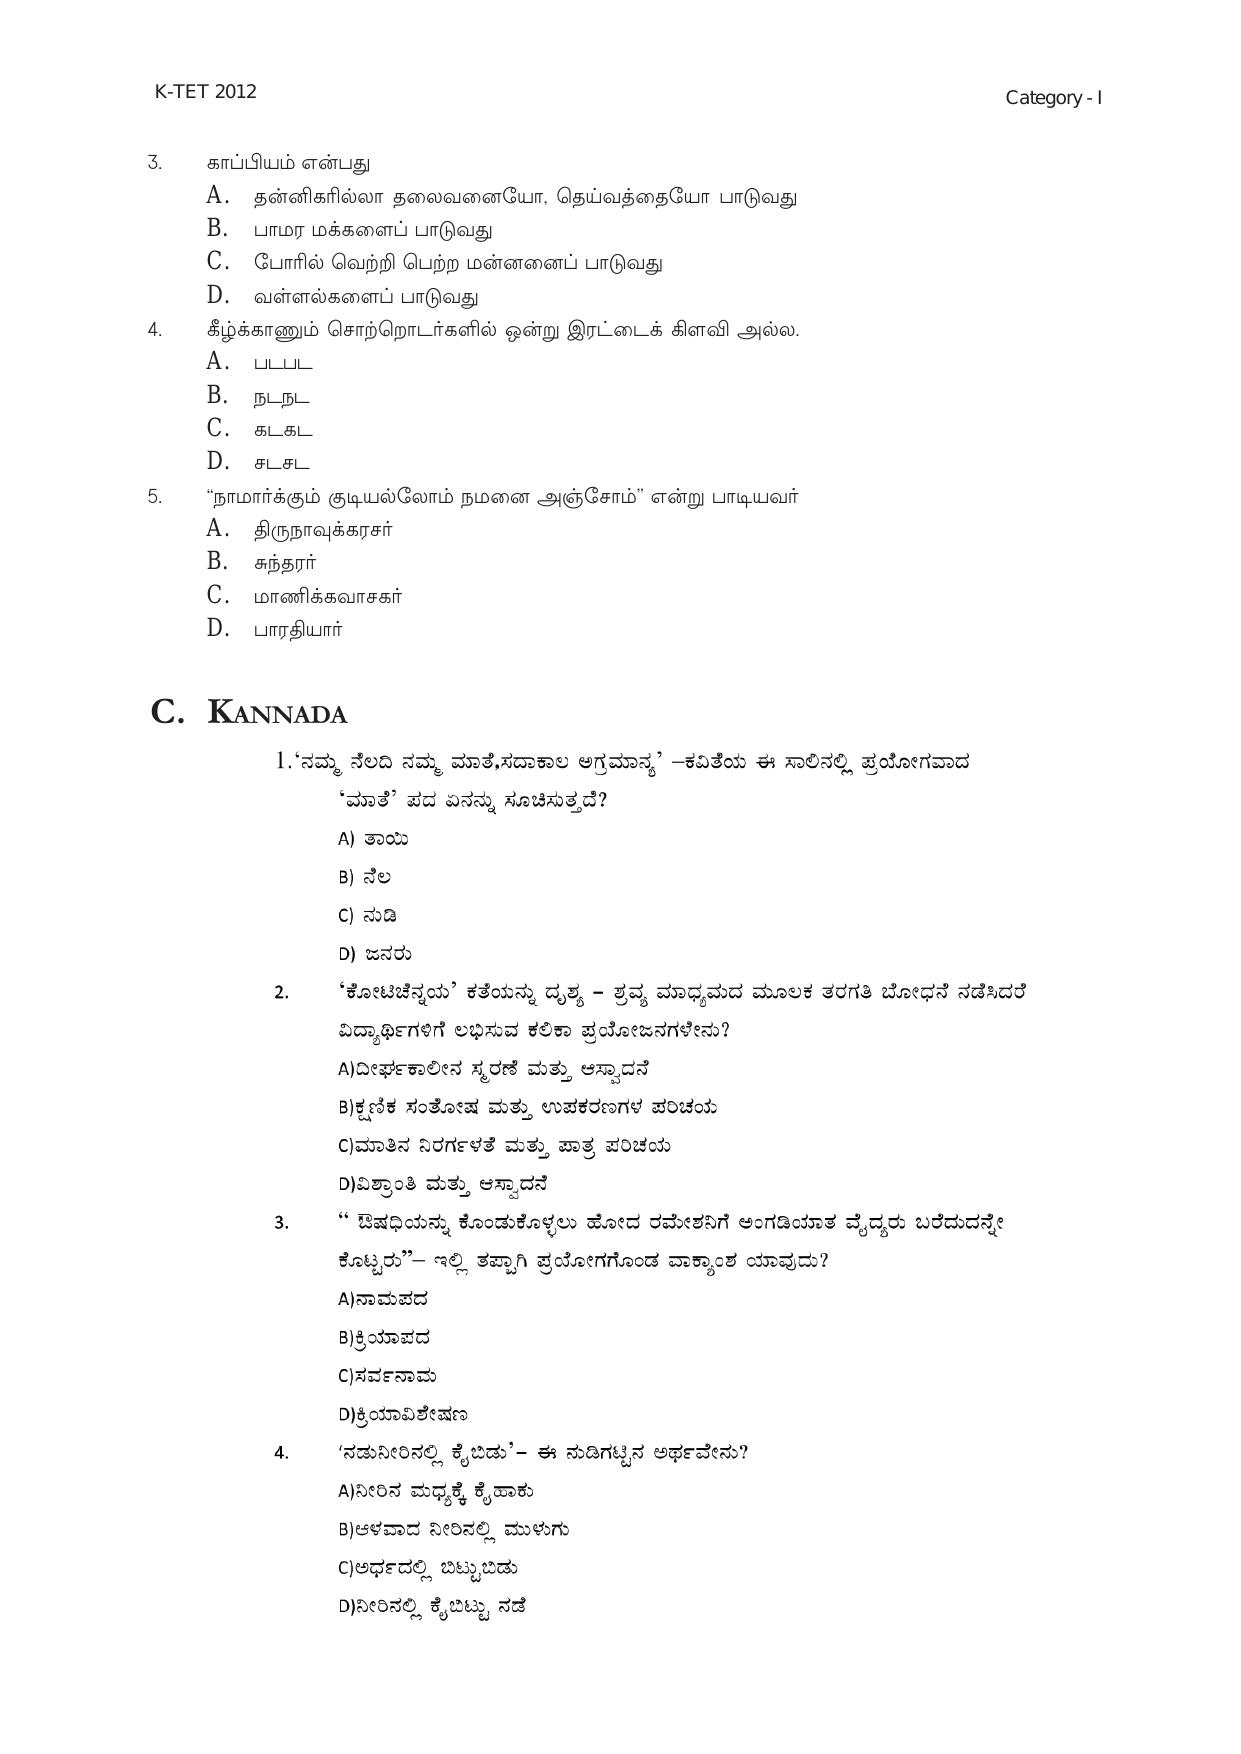 KTET Category 1 - Lower Primary Teacher (Class 1-5) Exam Old Papers - Page 6